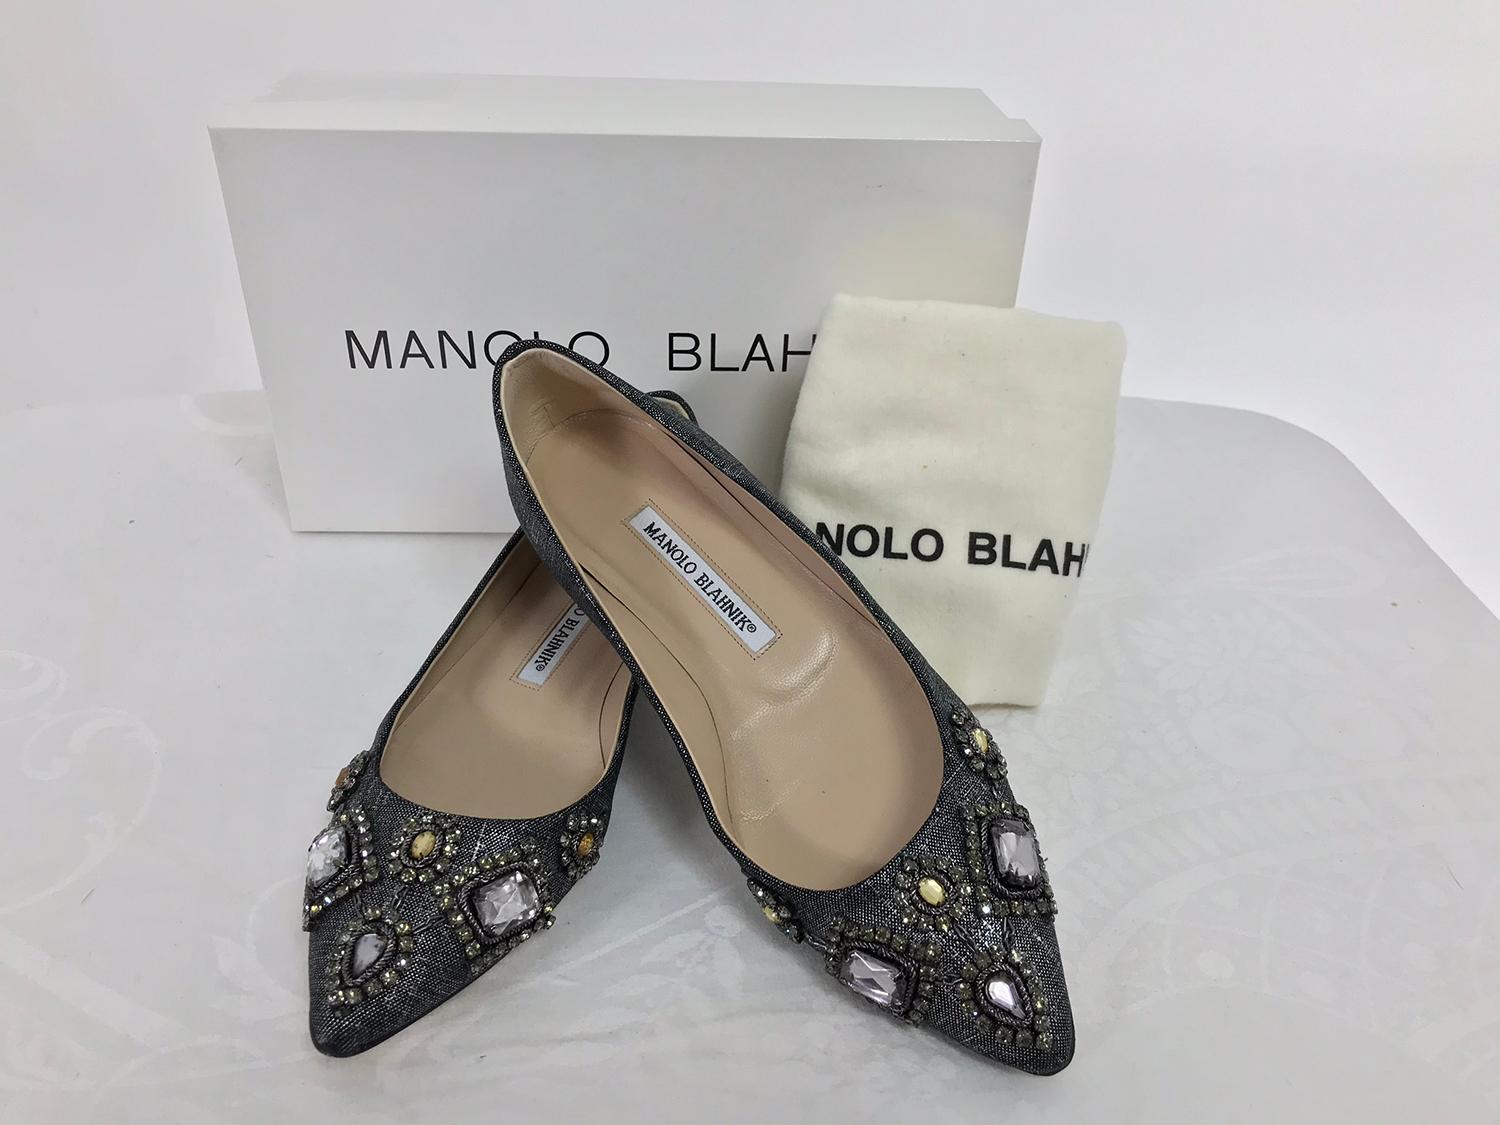 Manolo Blahnik Lanza jewel silver metallic fabric pointed toe ballet flats, barely worn, size 36 1/2. Silver metallic fabric with large sparkly jewels and beads. In excellent condition with the box and protector bag. 5/8 inch heel approximately.